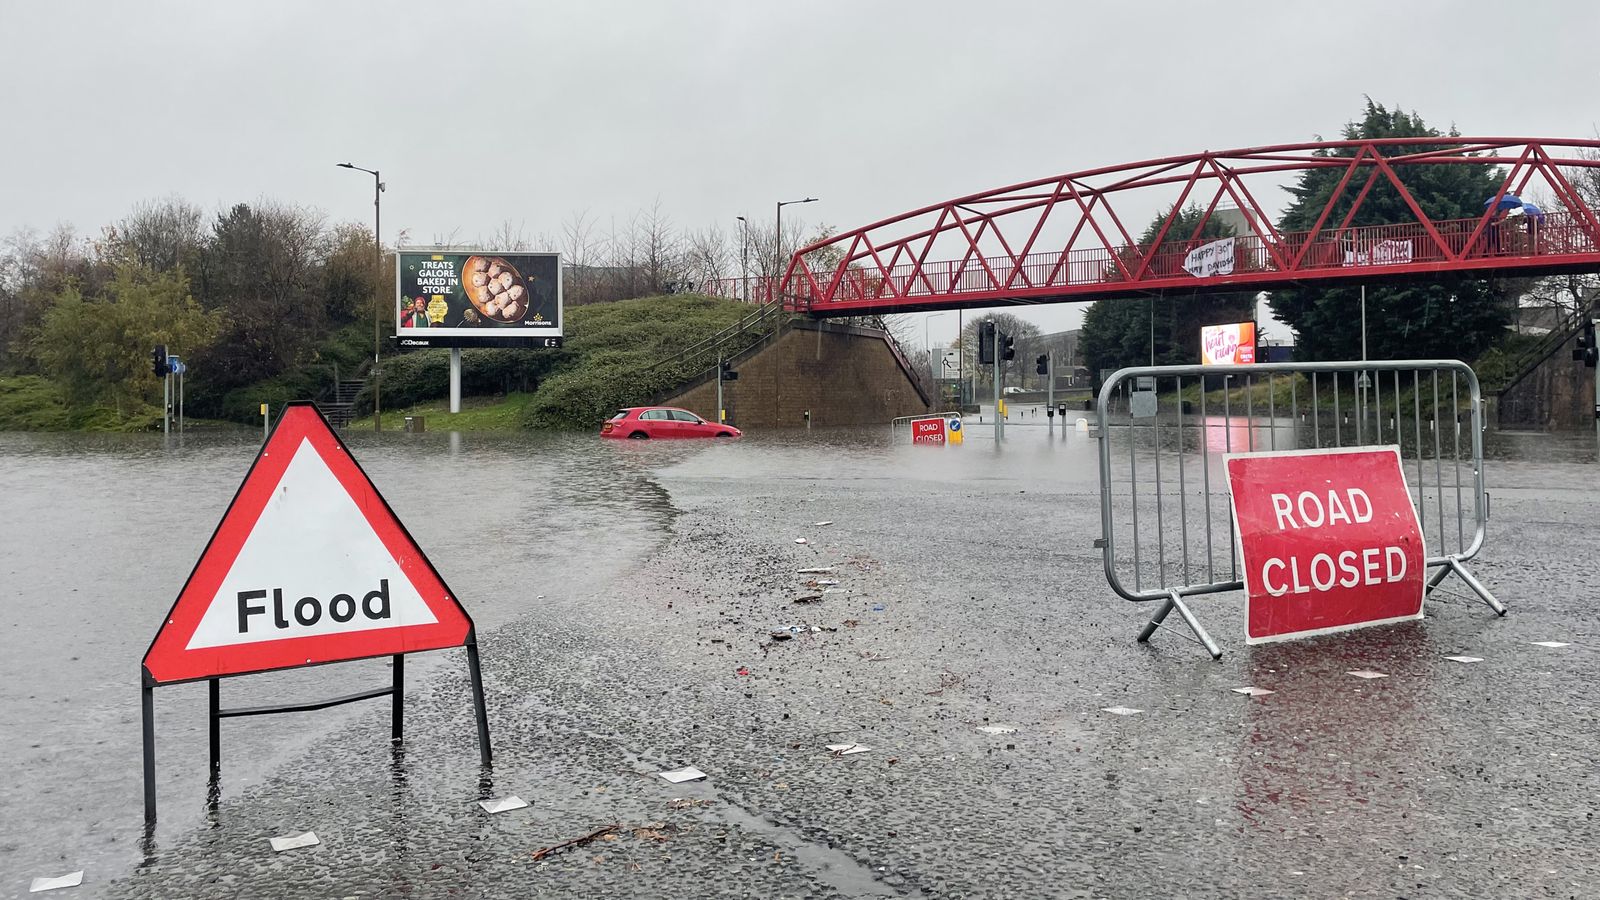 UK weather: One person swept into river and hundreds of others face flooding threat as heavy rain batters Scotland